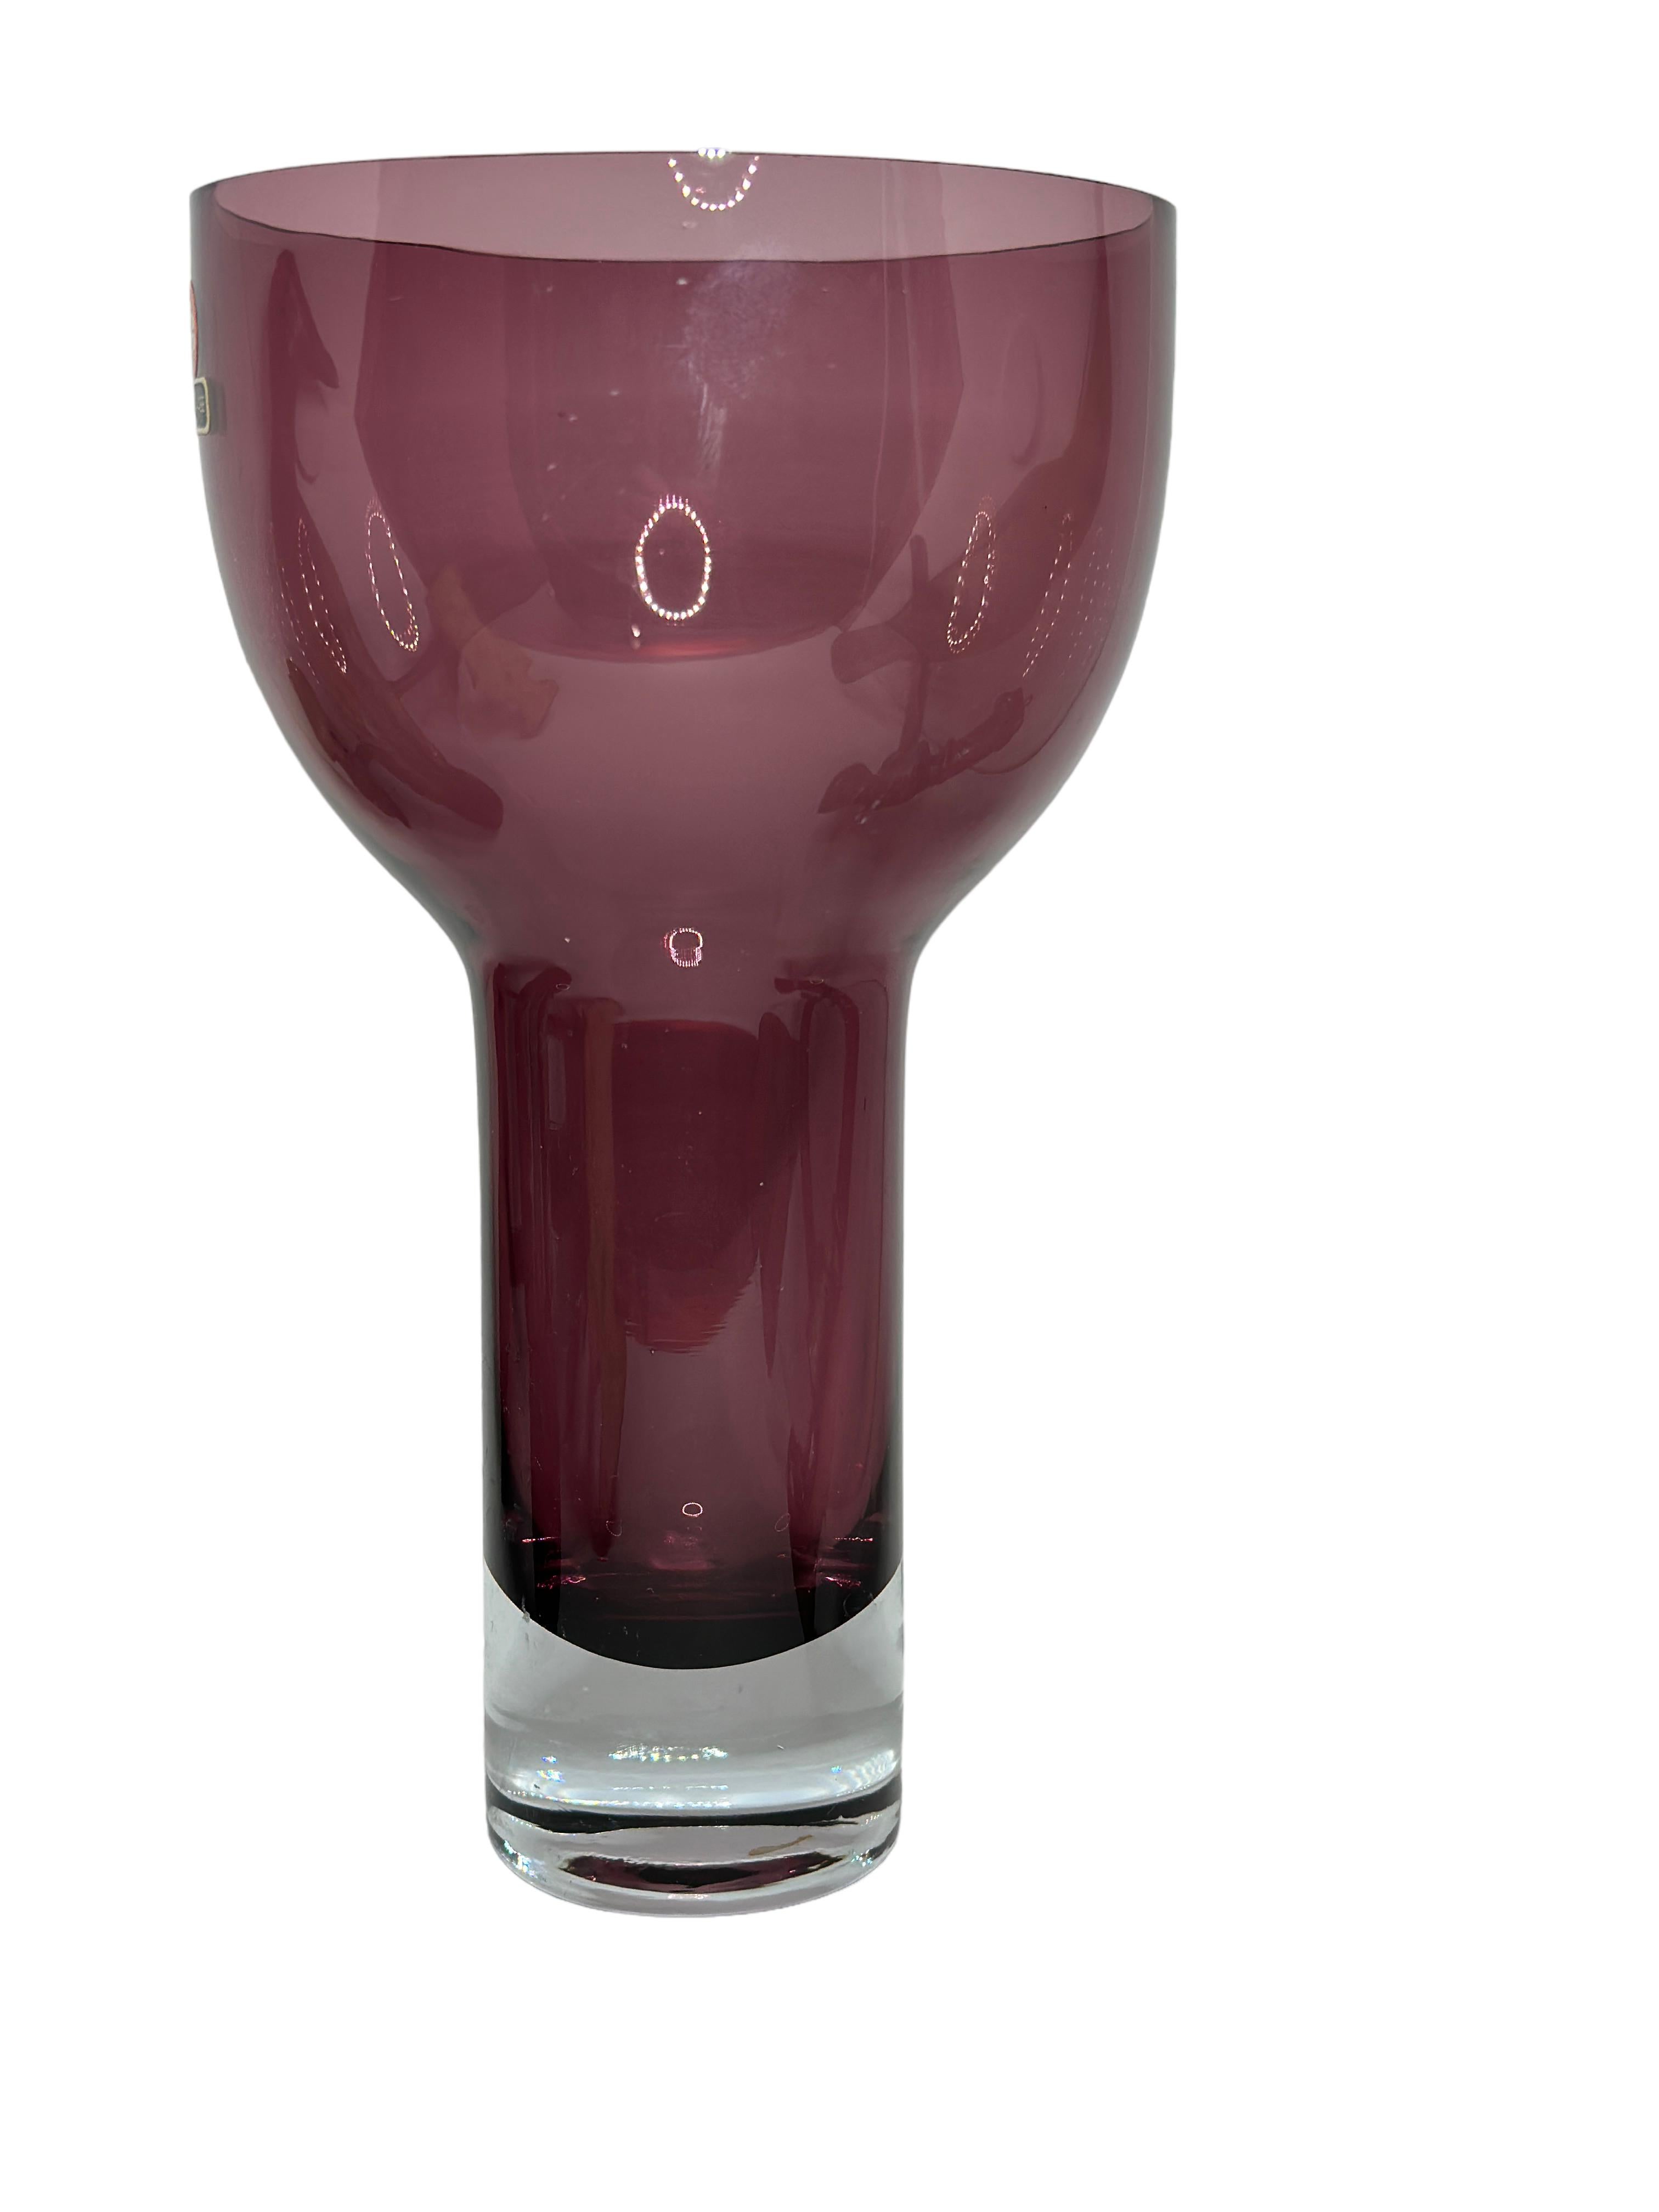 Molded Beautiful Hyacinth Vase, Ingrid Glass Vase in Purple Color, 1970s Germany For Sale